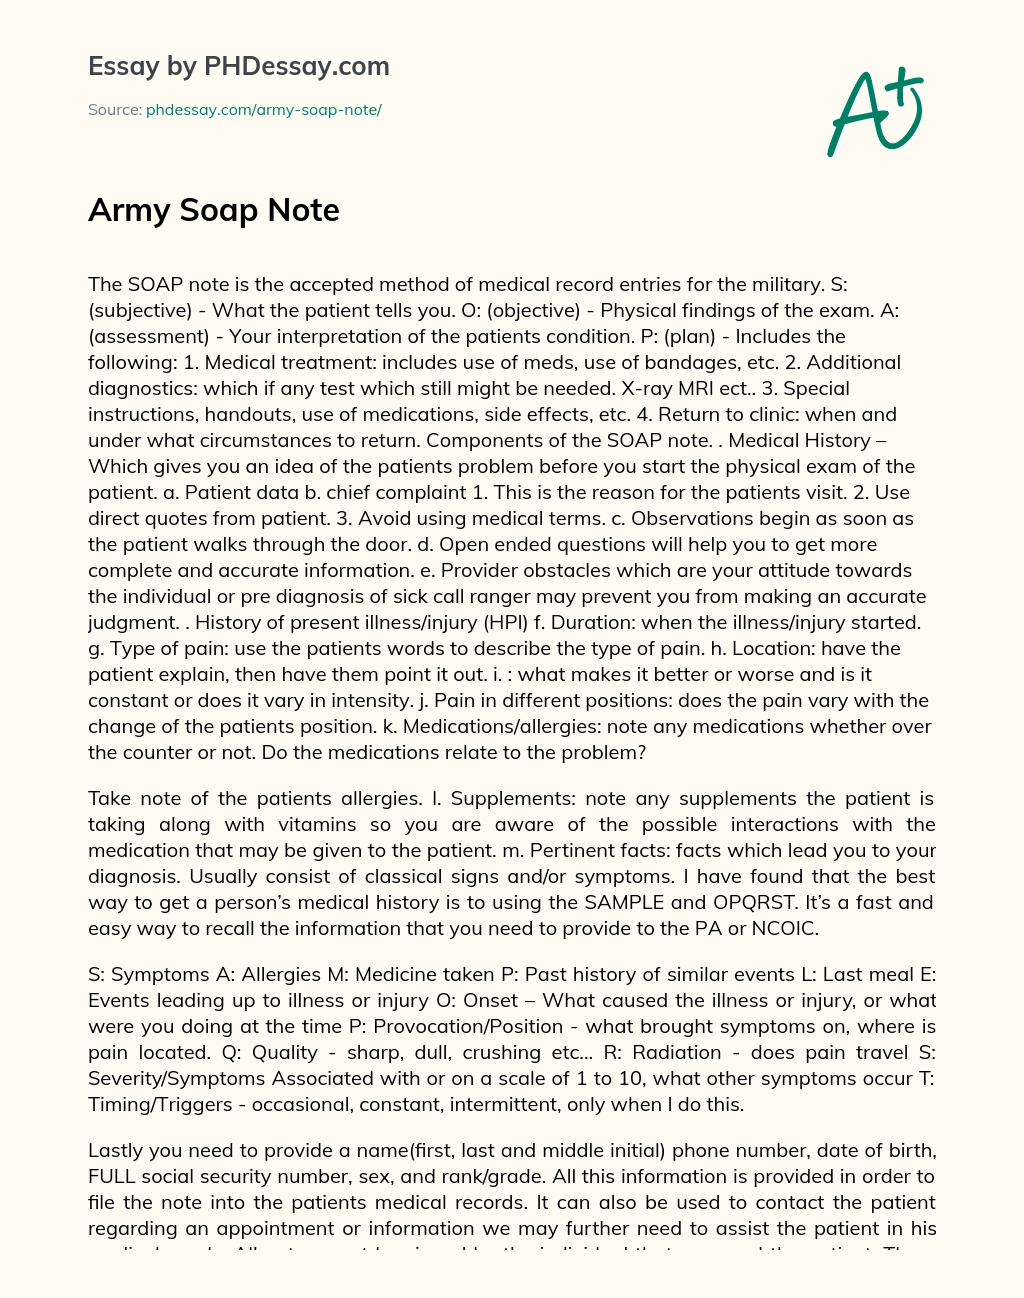 Army Soap Note essay